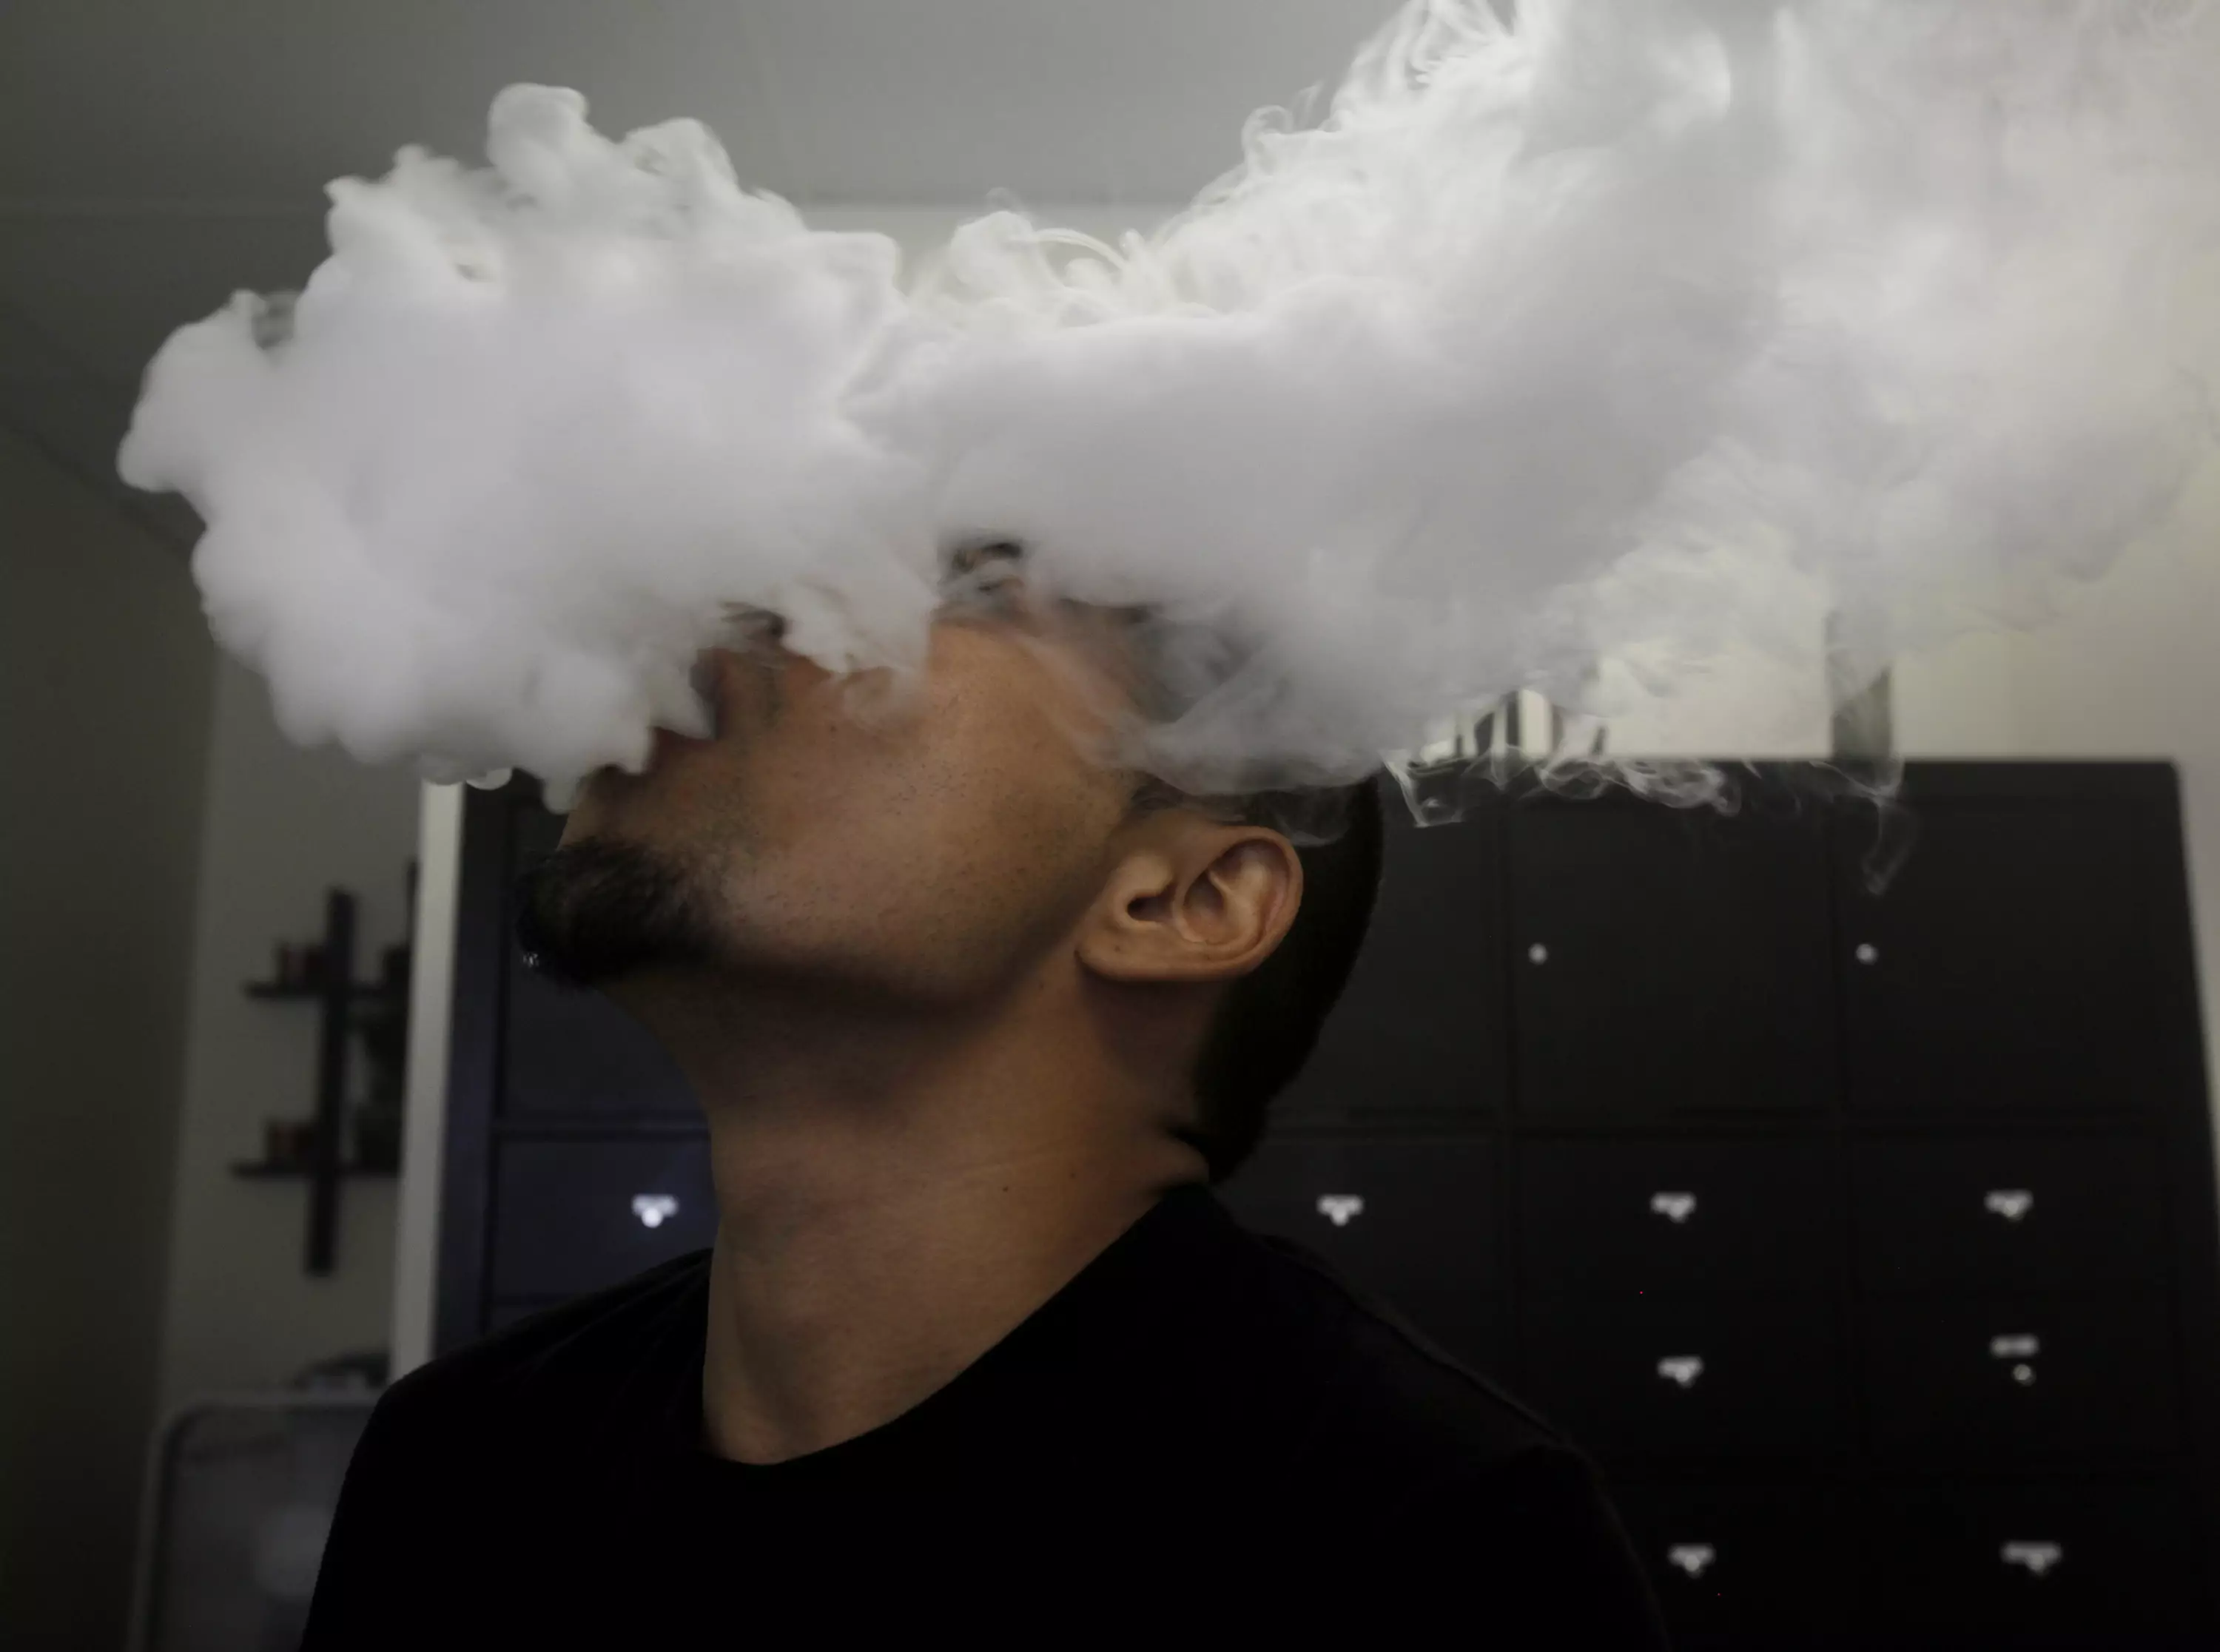 Vaping company Juul said a total ban on e-cigarettes would create a thriving black market.